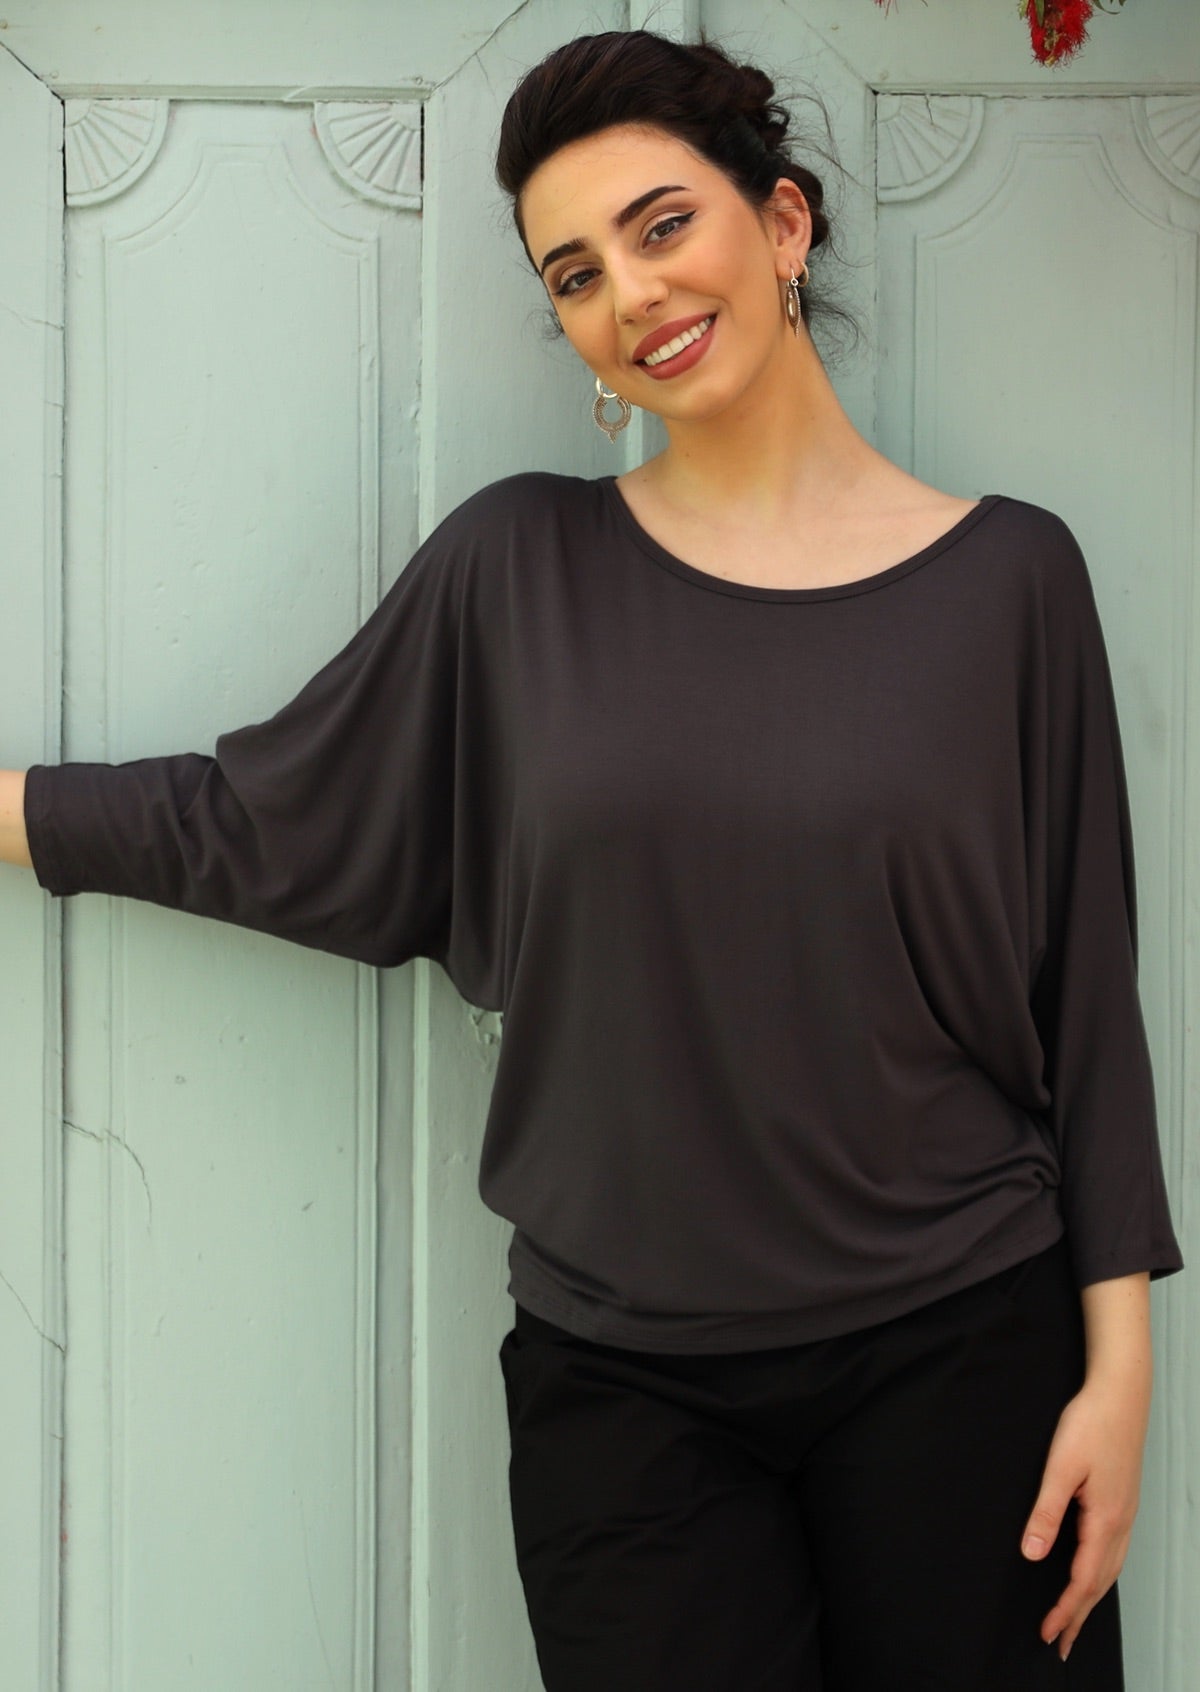 Woman wearing a 3/4 sleeve rayon batwing round neckline dark grey top with black pants.